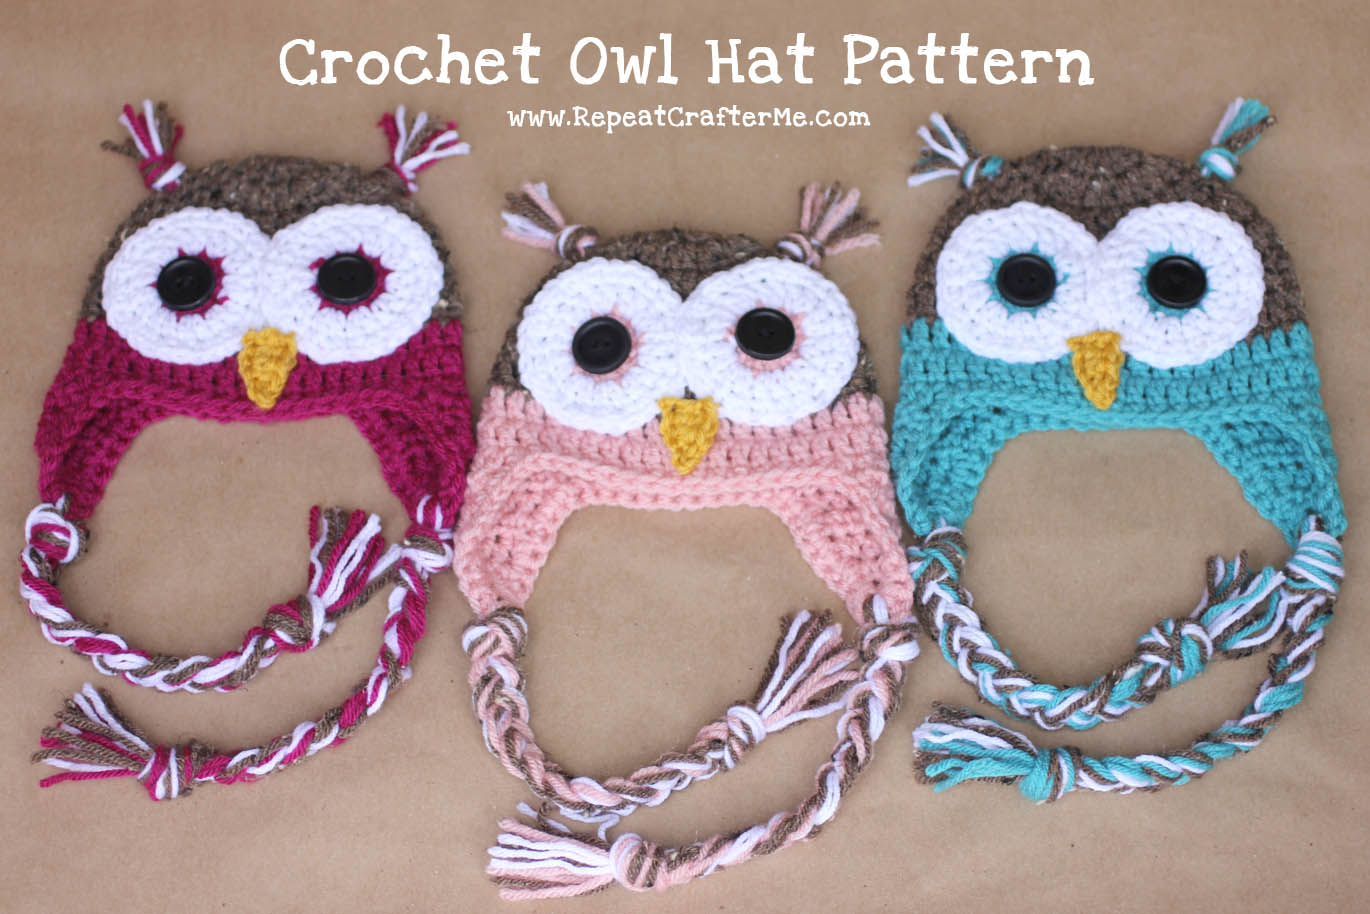 Repeat Crafter Me Crochet Owl Hat Pattern Crochet Owl Hat Pattern Repeat Crafter Me